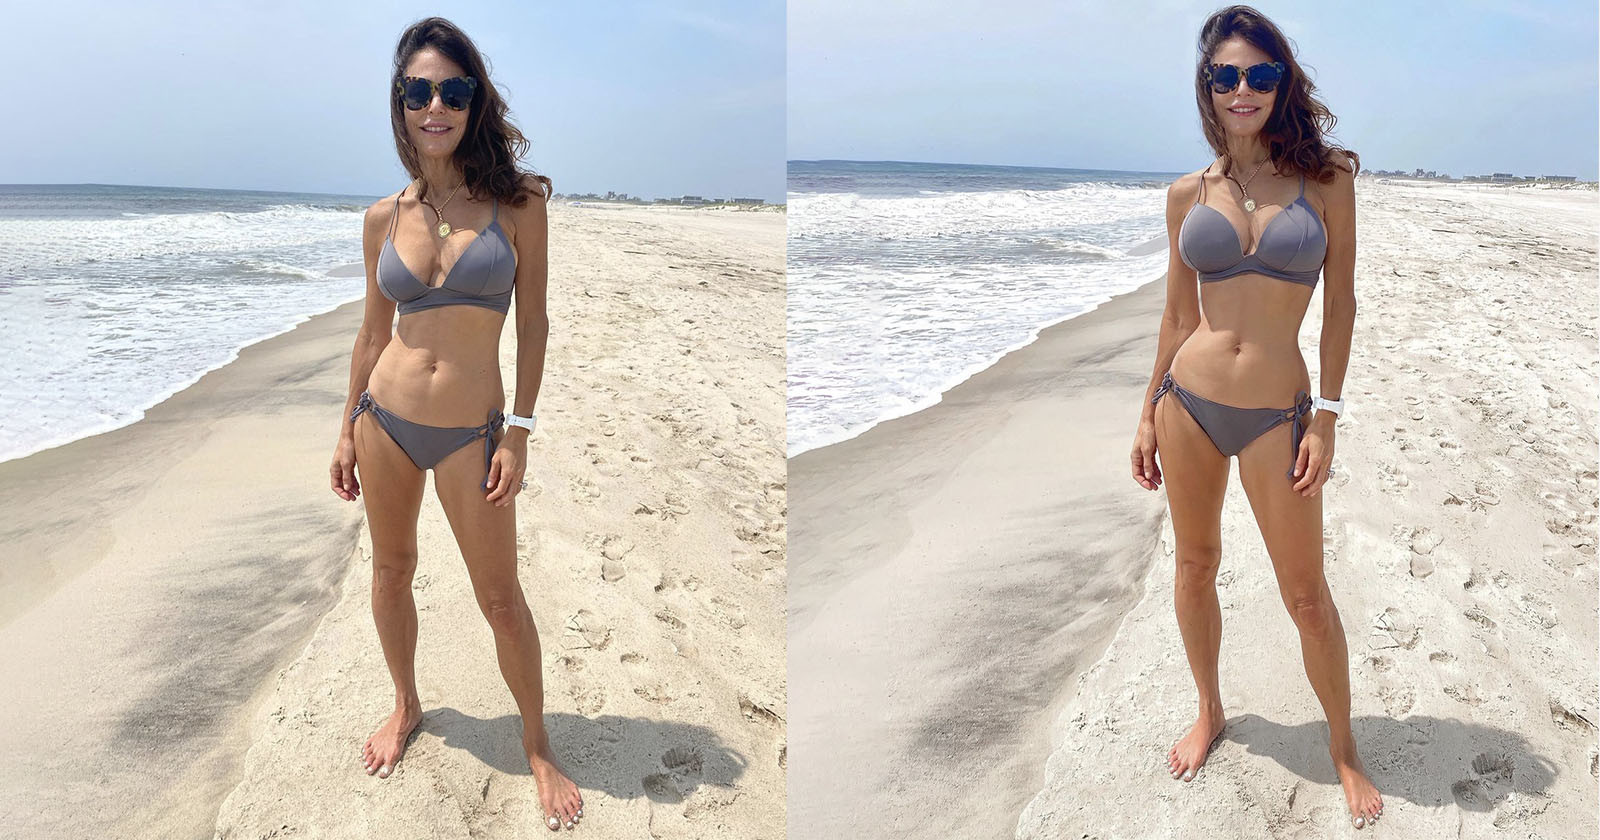 Reality TV Star Photoshops Herself to Show How Deceptive Social Media Is